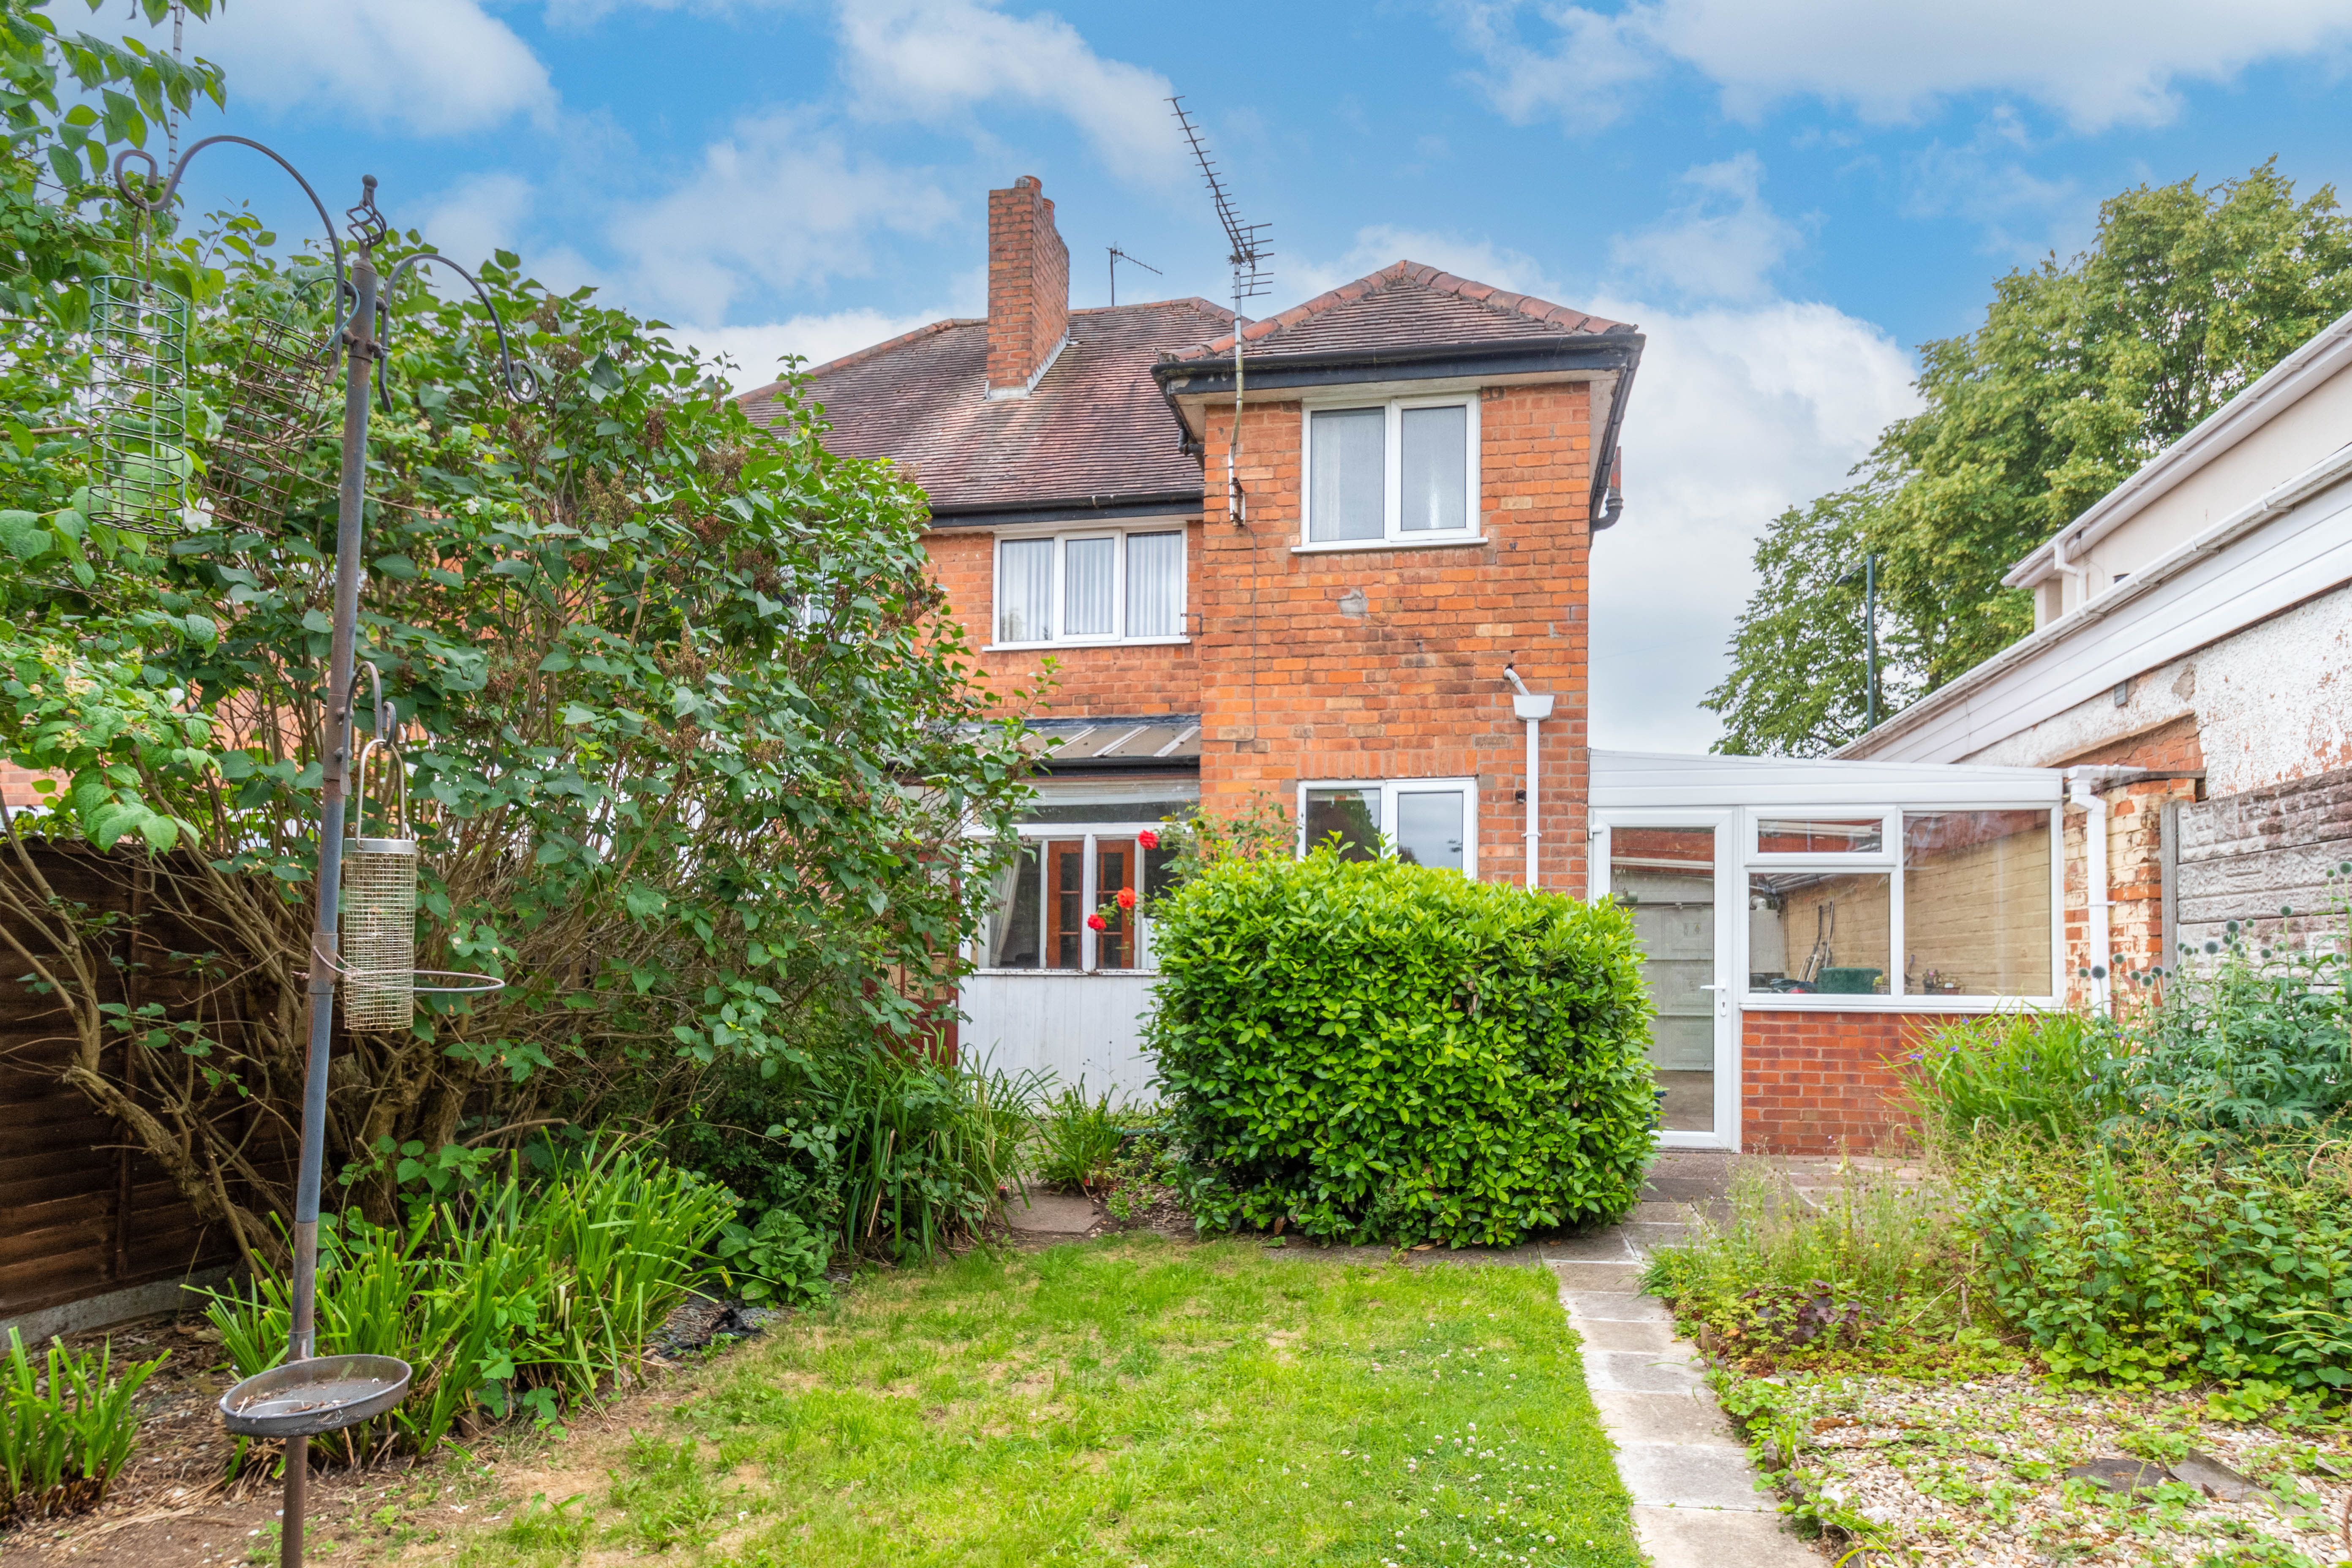 3 bed house for sale in Wychall Road, Birmingham 12